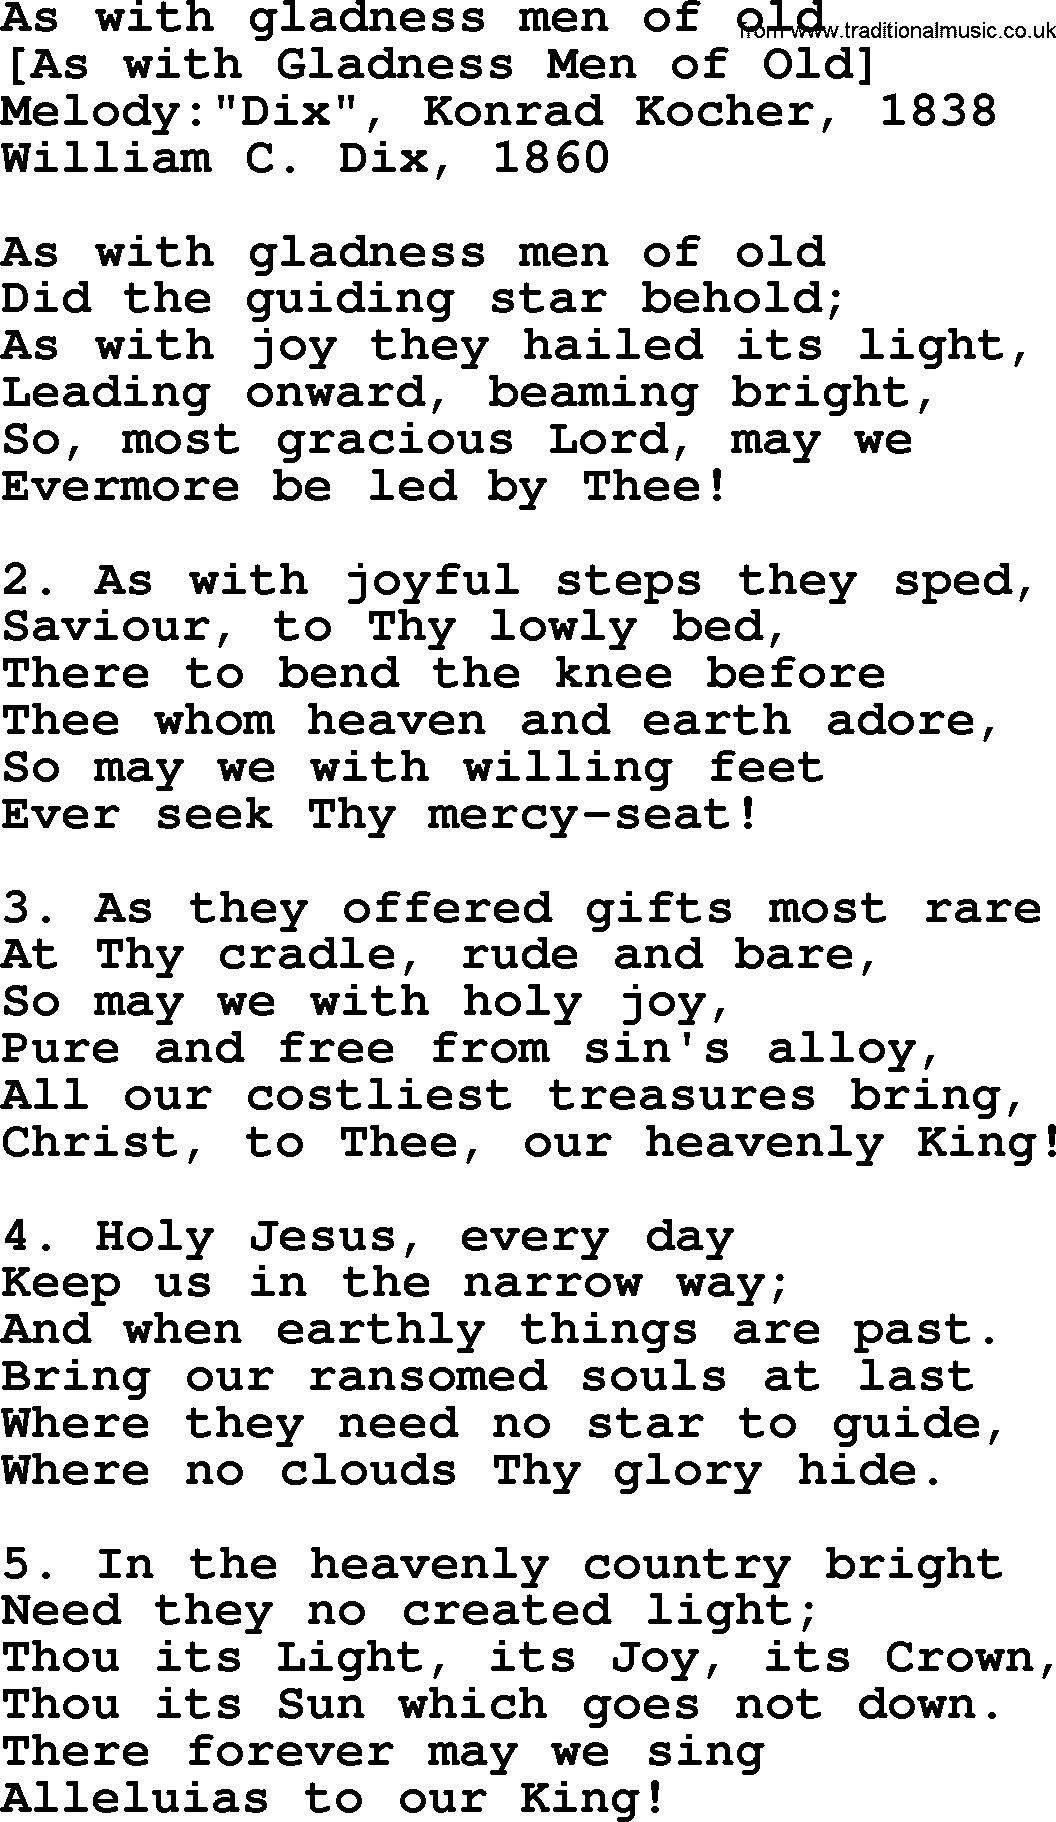 Old English Song: As With Gladness Men Of Old lyrics